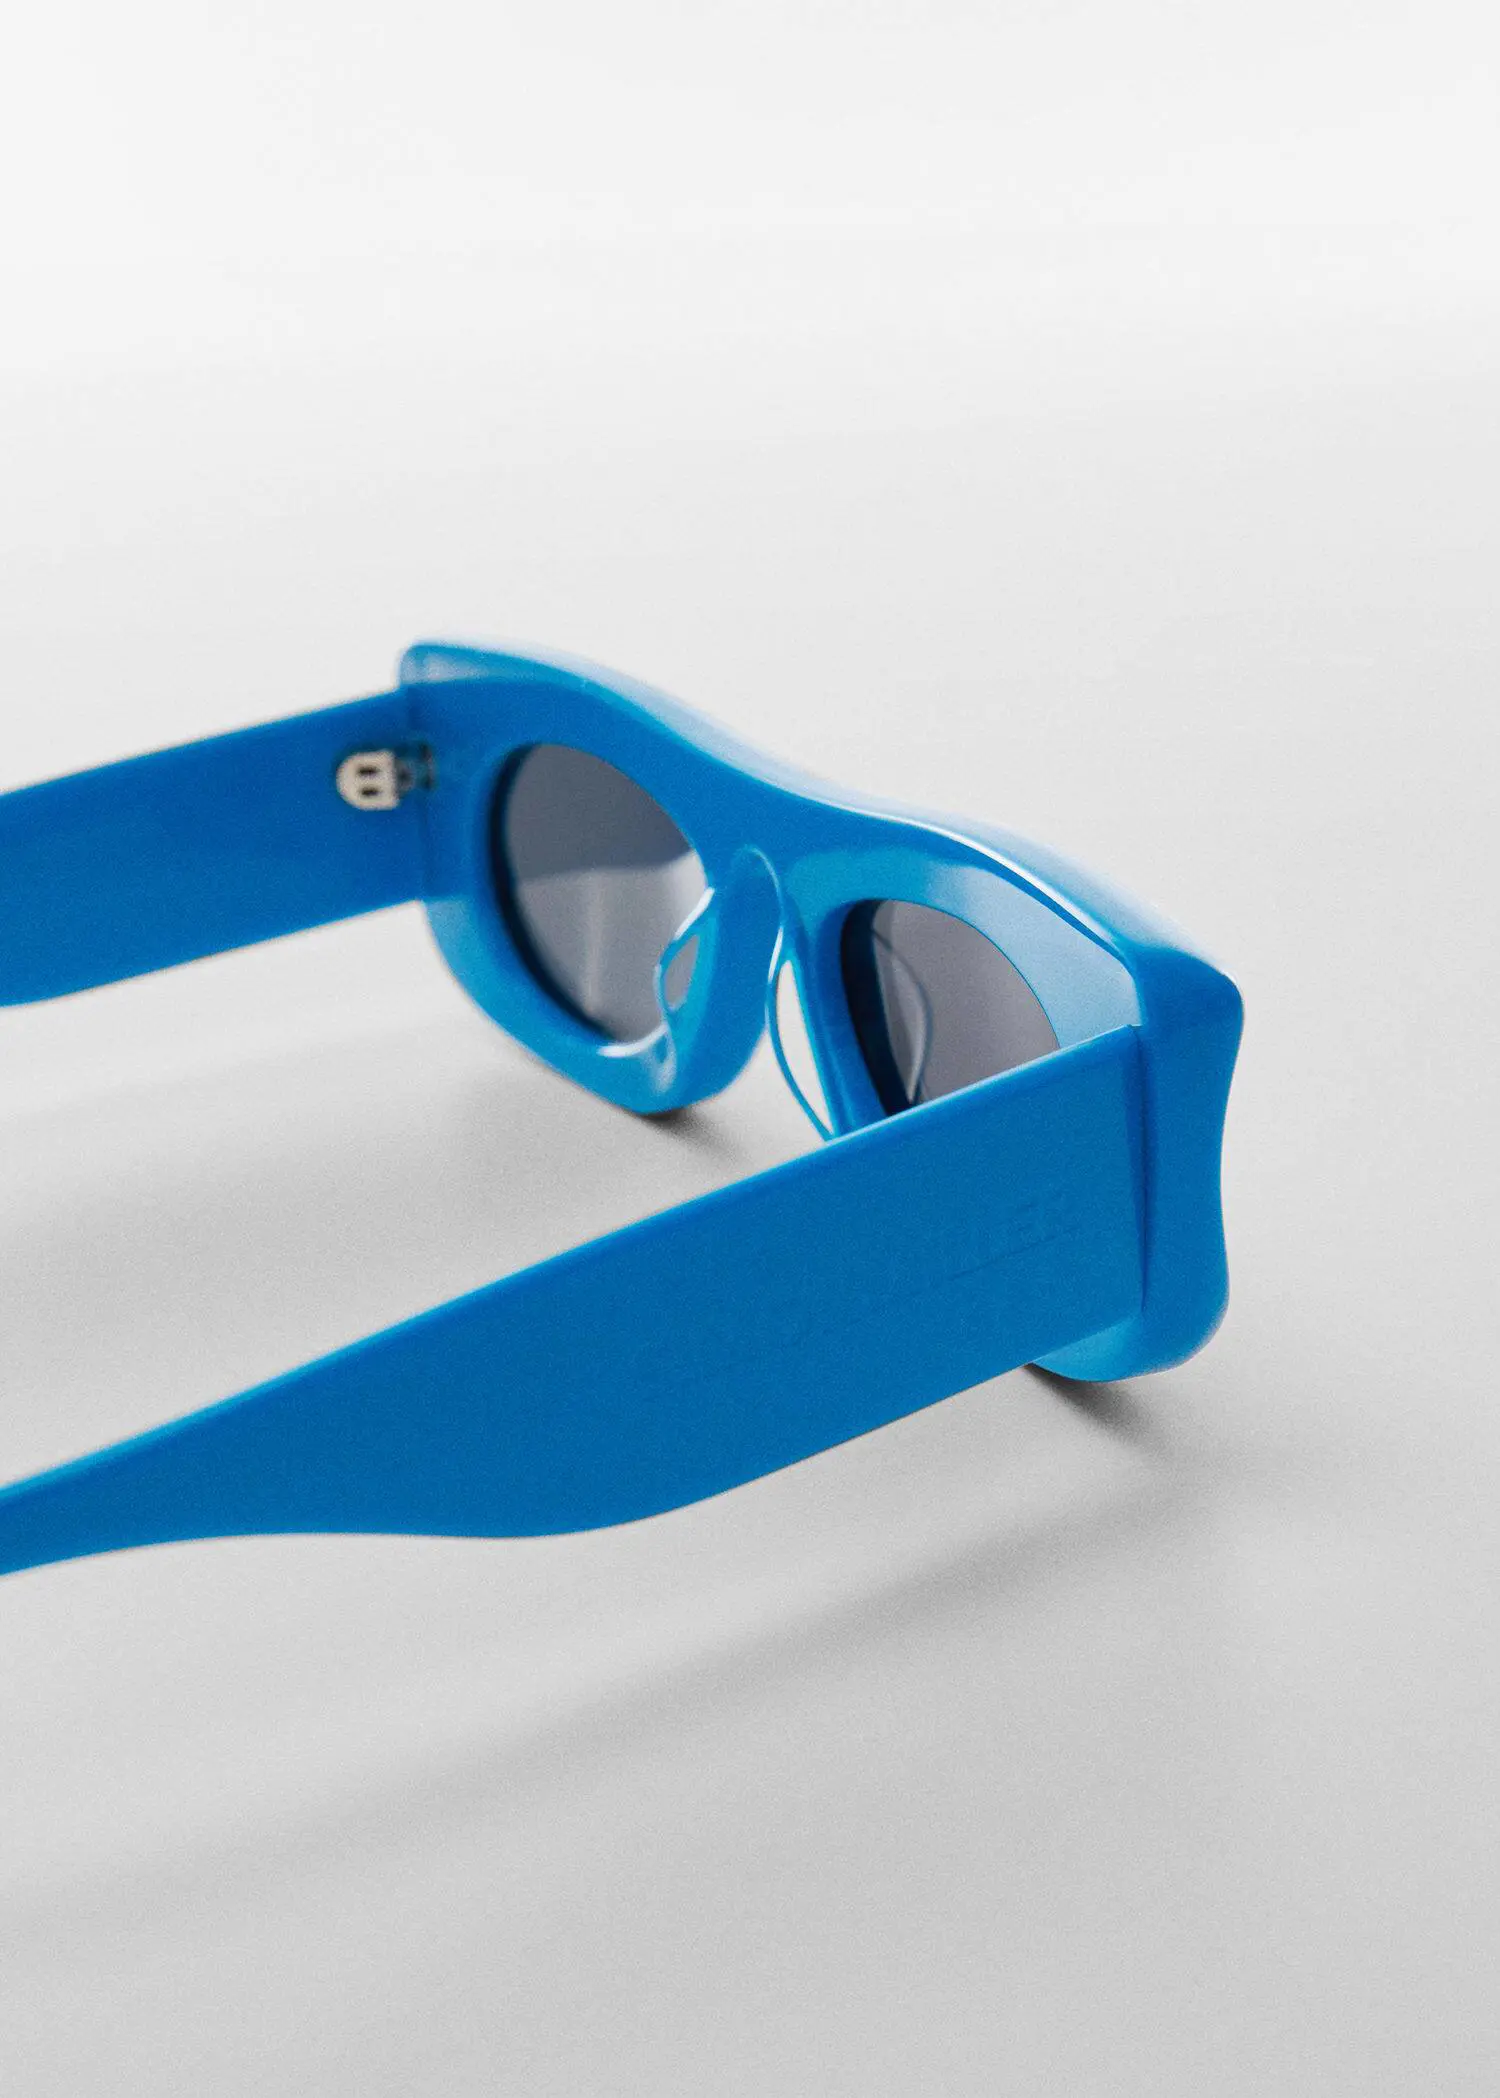 Mango Volume frame sunglasses. a pair of blue sunglasses sitting on top of a table. 